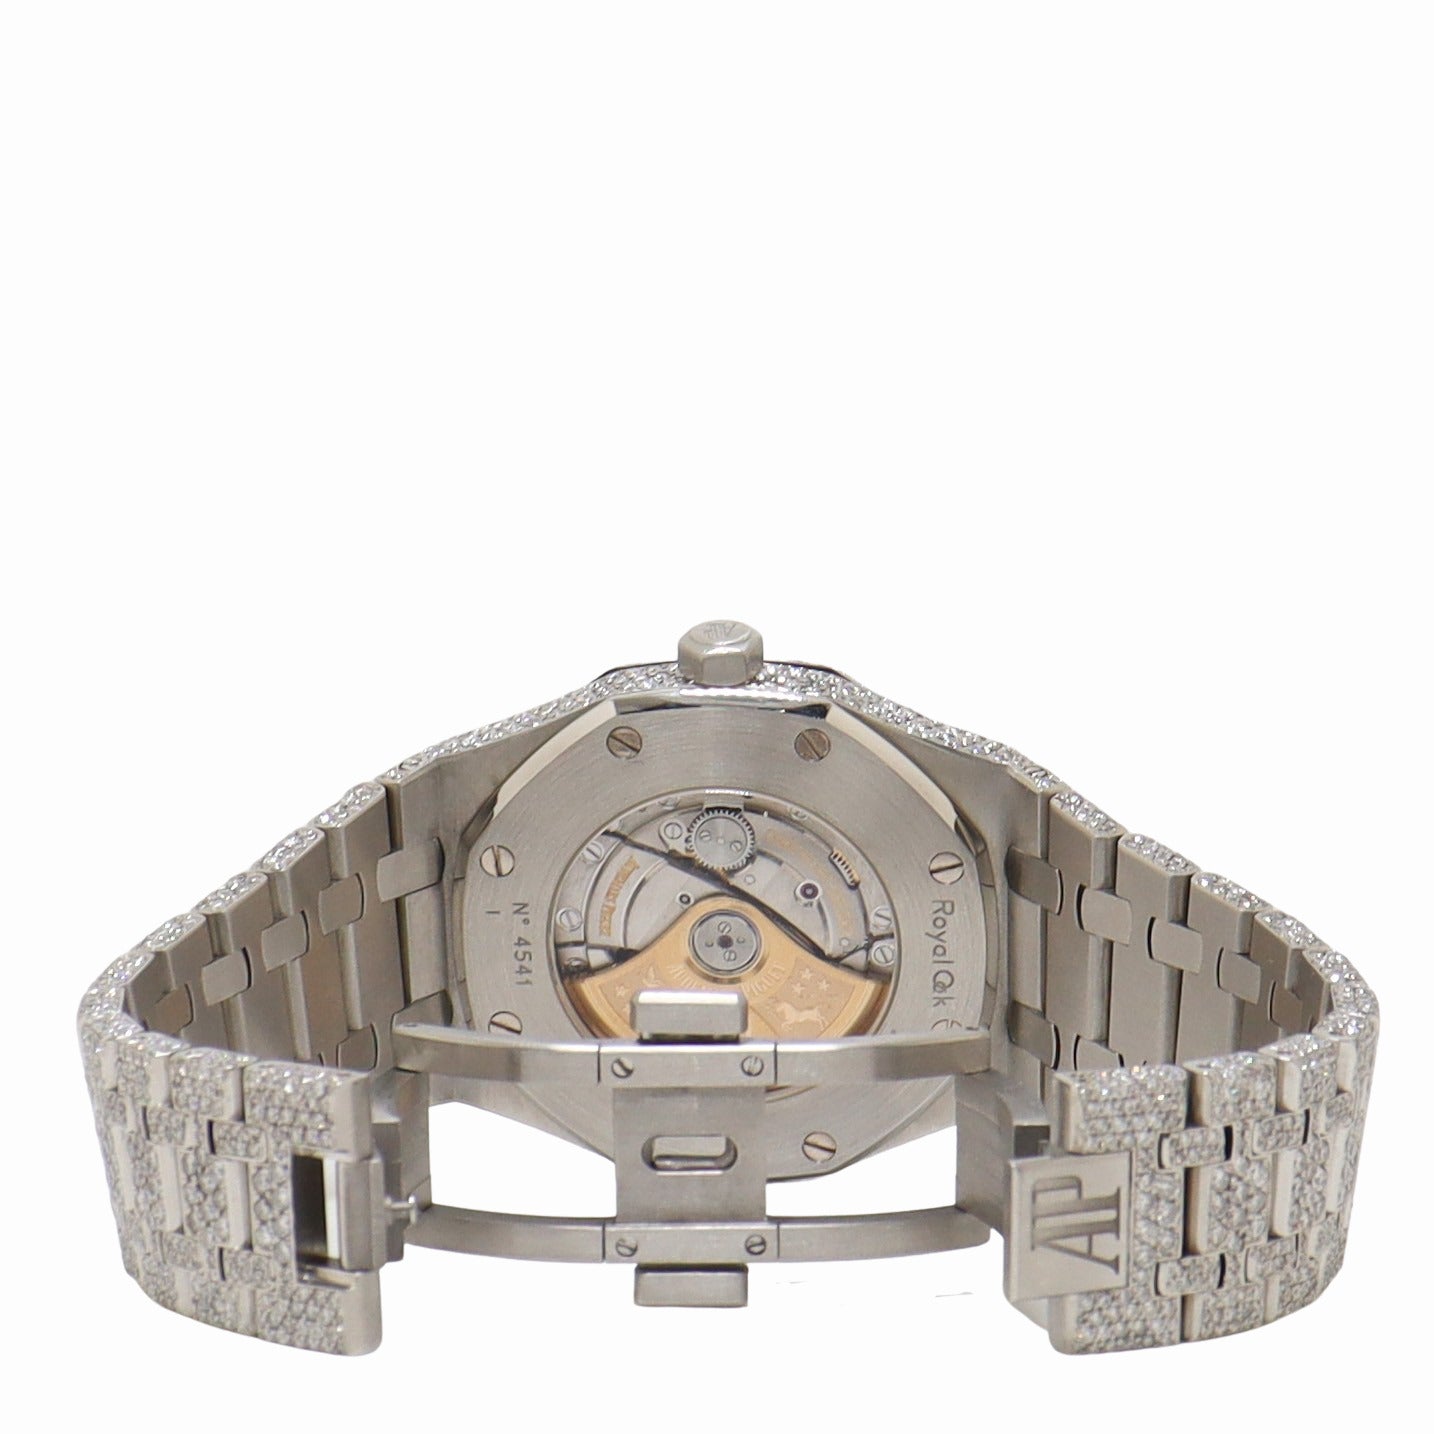 Load image into Gallery viewer, Audemars Piguet Royal Oak 41mm ICED OUT Stainless Steel Pave Diamond Dial Watch - Happy Jewelers Fine Jewelry Lifetime Warranty
